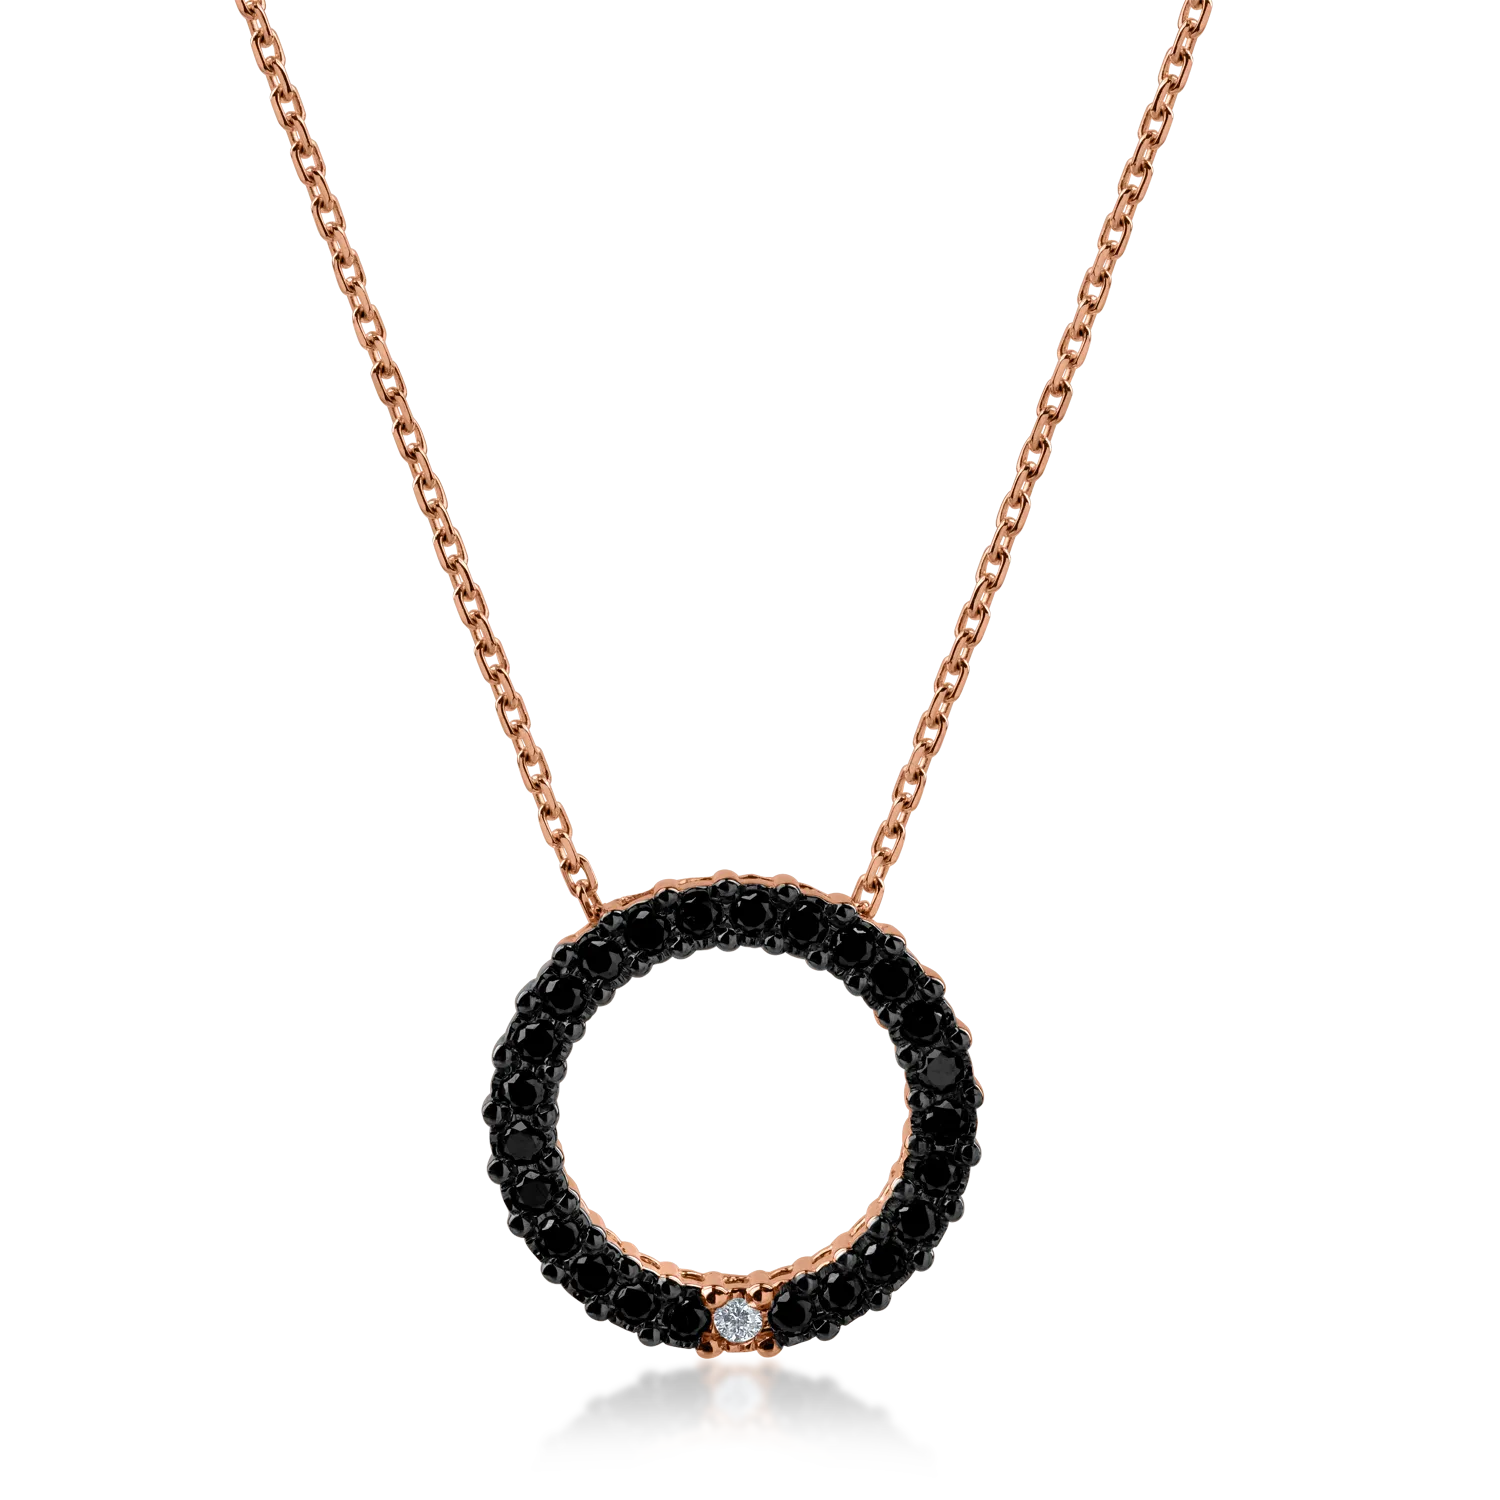 Rose gold pendant necklace with 0.45ct diamonds